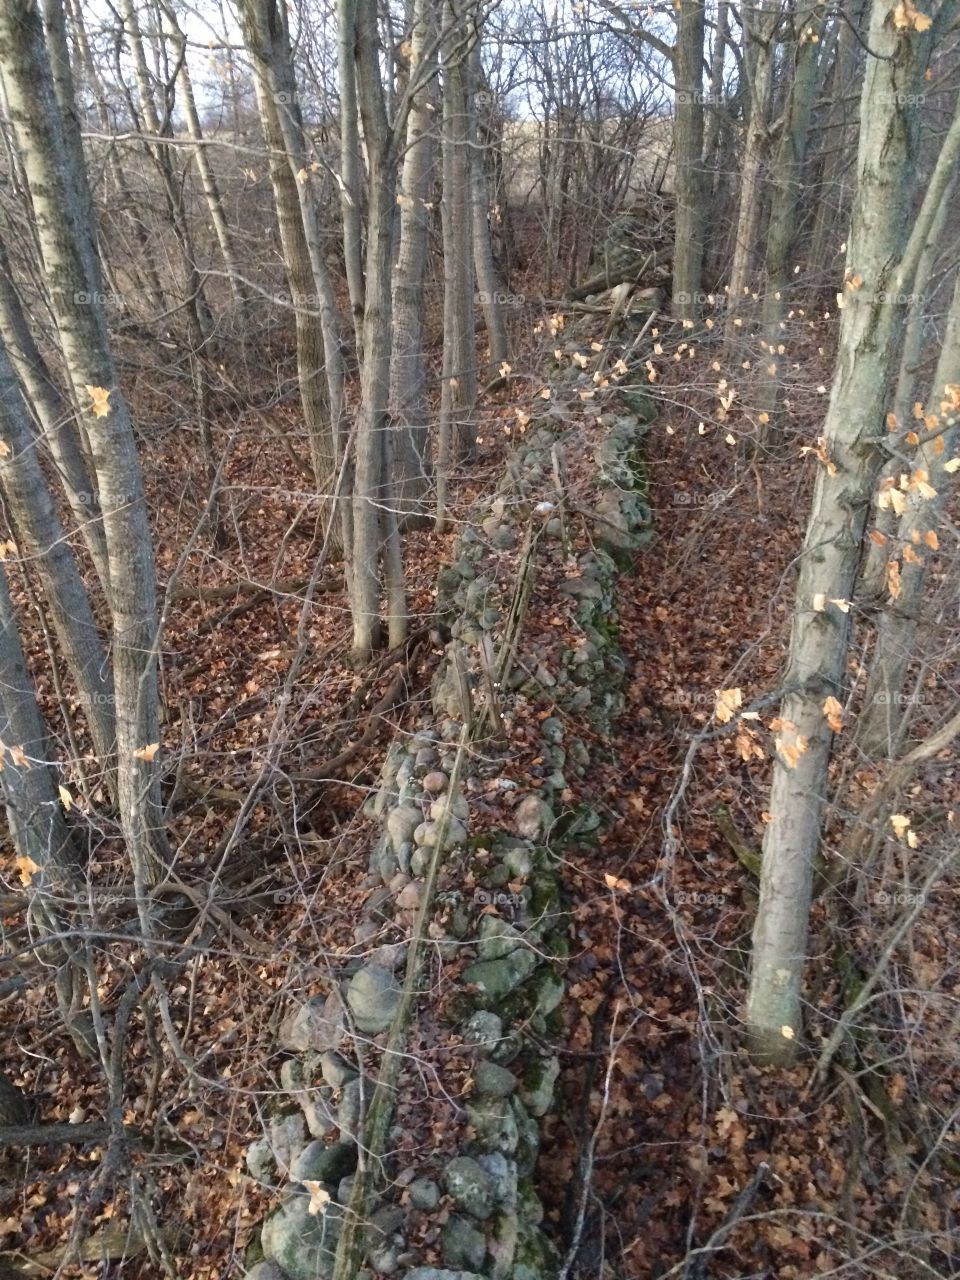 stone wall - view from tree stand where I was bow hunting